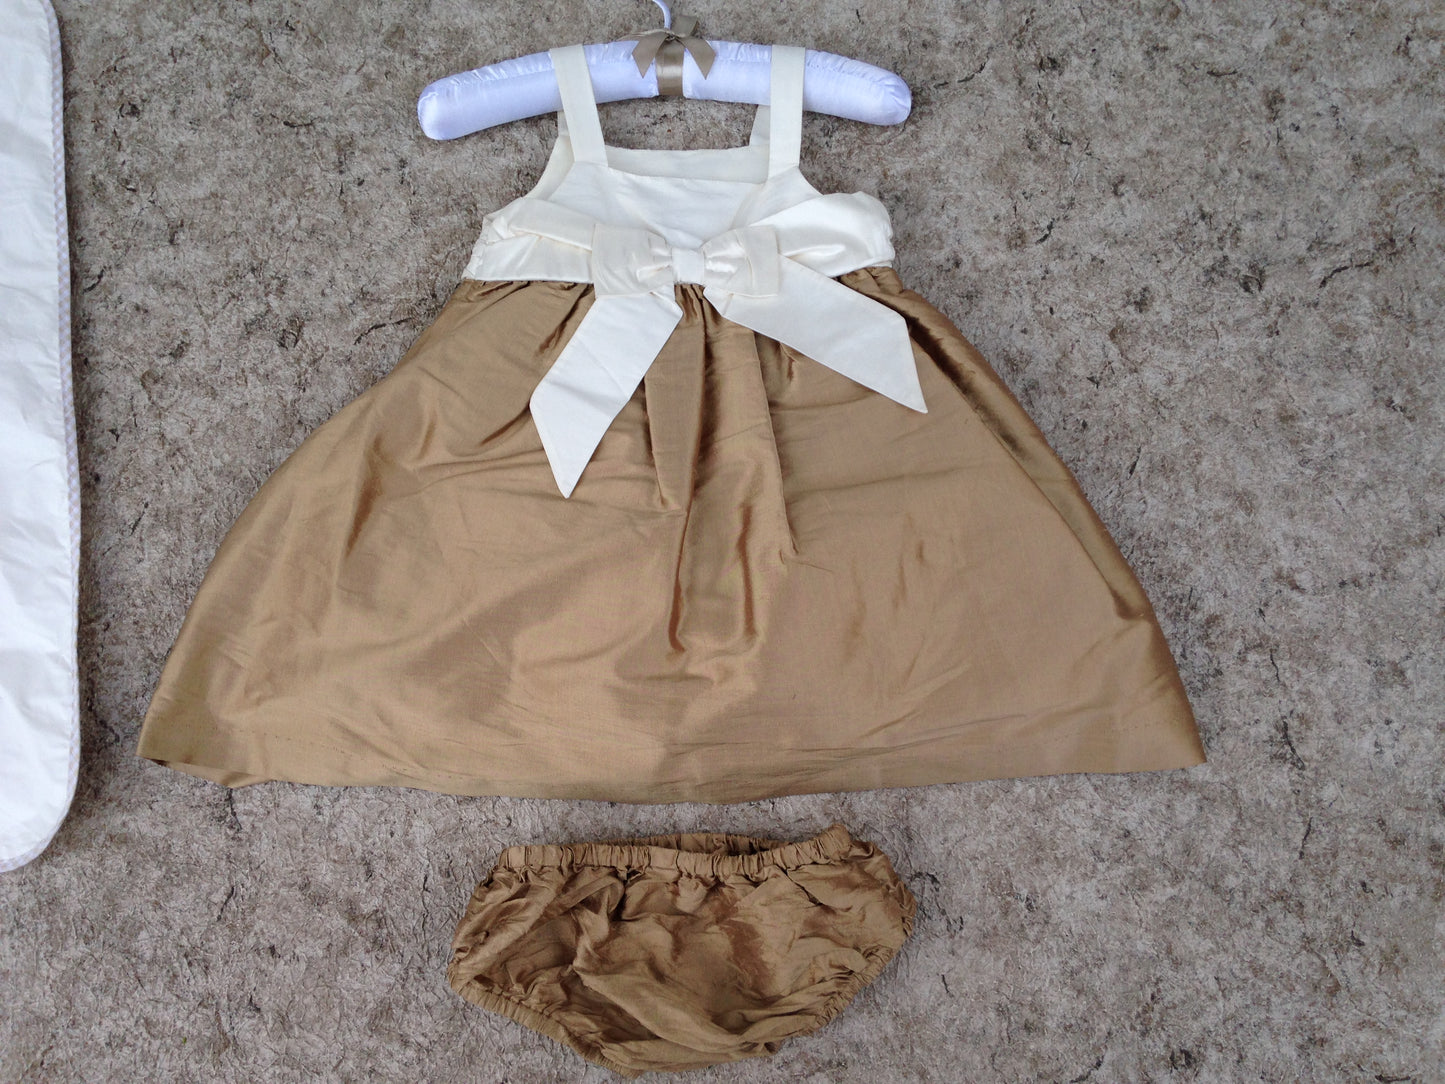 Dress Child Size 12-18 Month Desiigner Jane and Jack Satin With Panties and Dress Bag